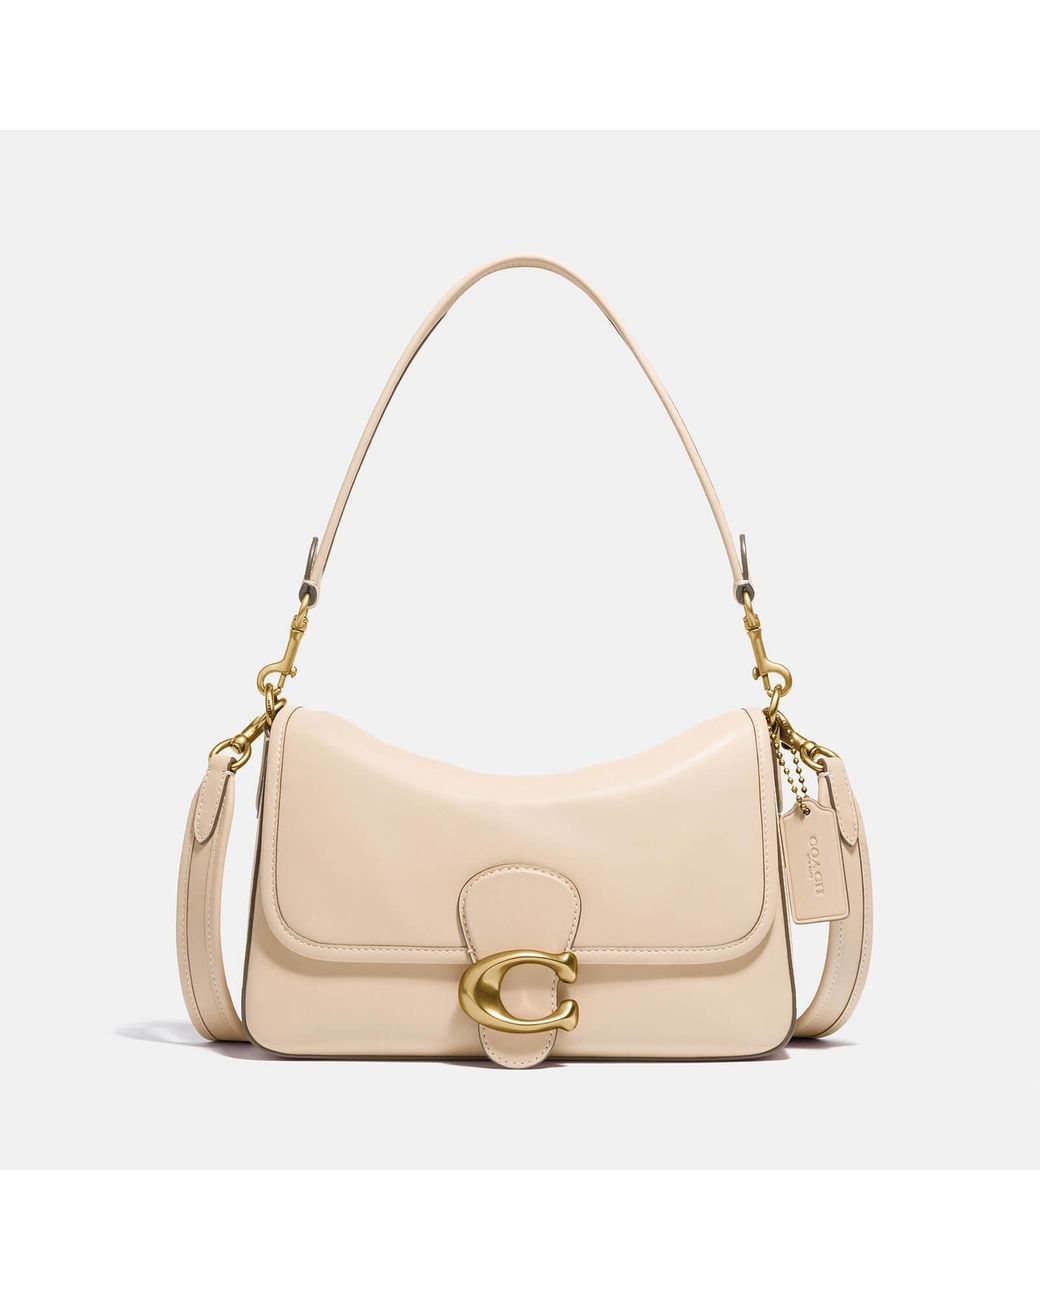 COACH Soft Calf Leather Tabby Shoulder Bag in Natural | Lyst Australia